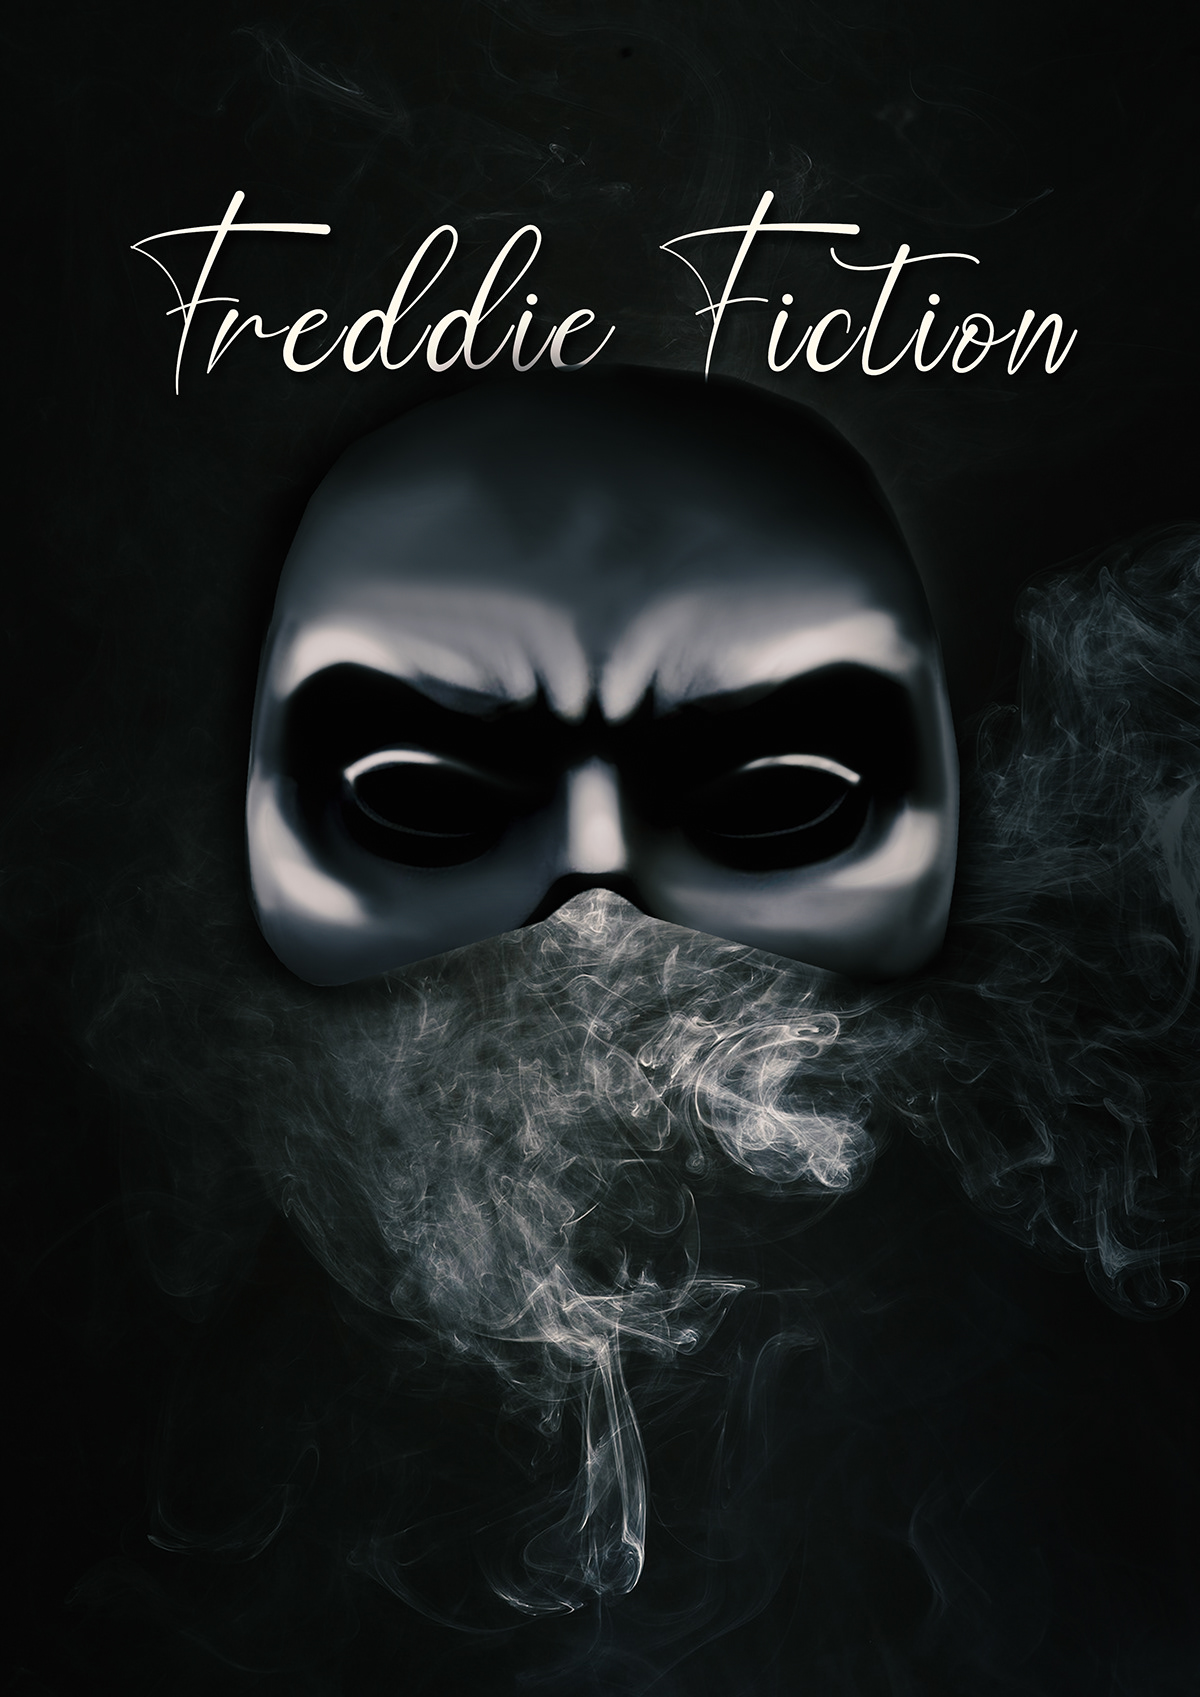 Freddie Fiction haroon rashid Musical Poster dark digital art dark poster  Digital art poster DIGITAL PAINTING POSTER  mysterious poster smoke digital painting